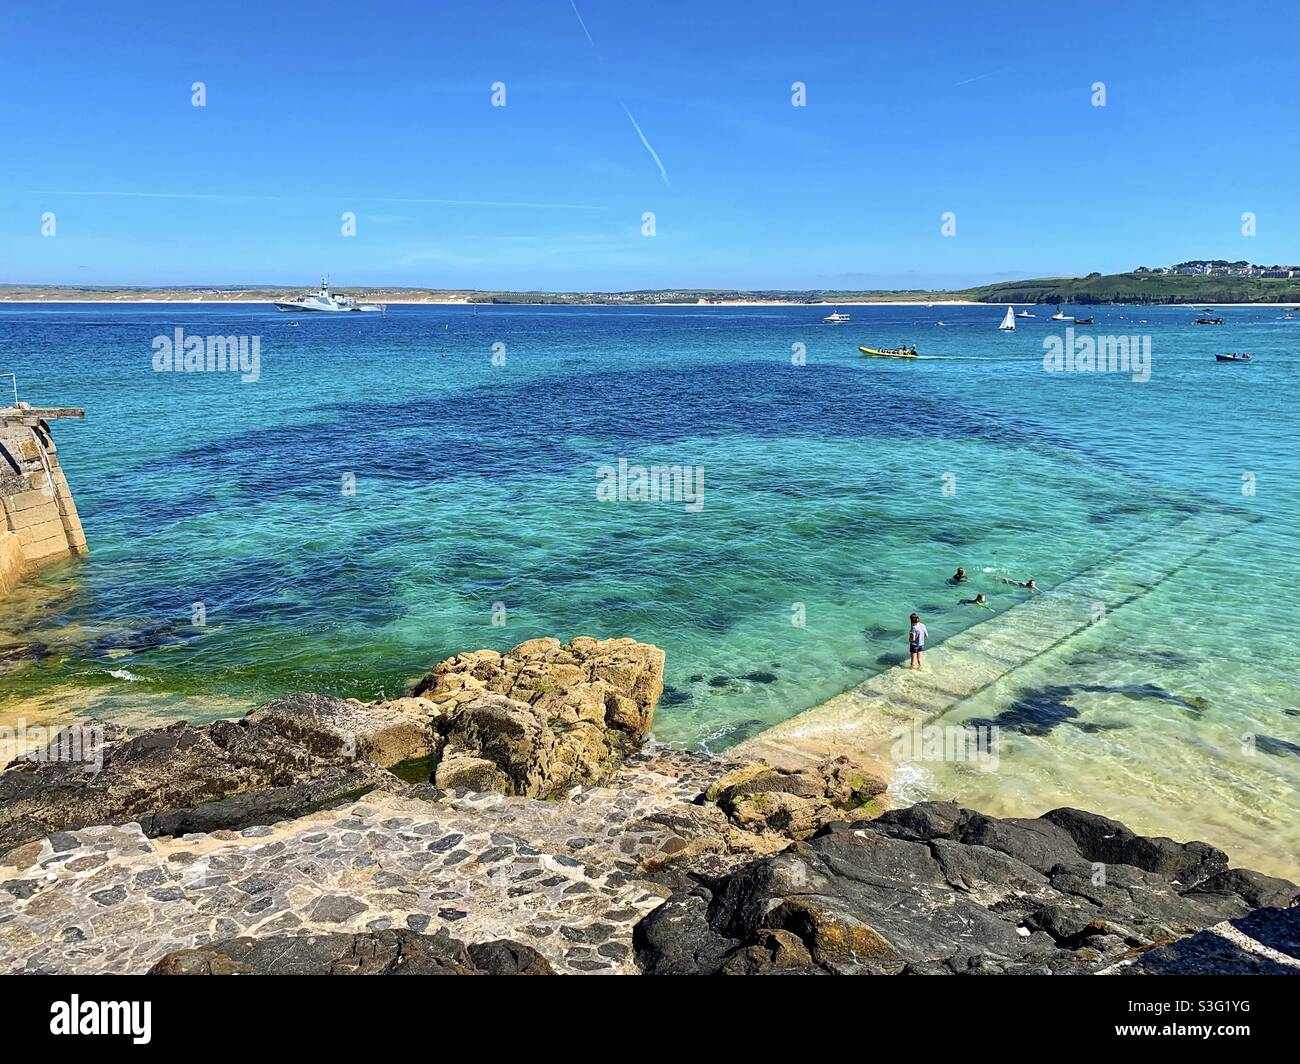 G7 Sunmit Cornwall: Beautiful St Ives / Carbis Bay on Saturday 12th June 2021 in full sunshine. Stock Photo